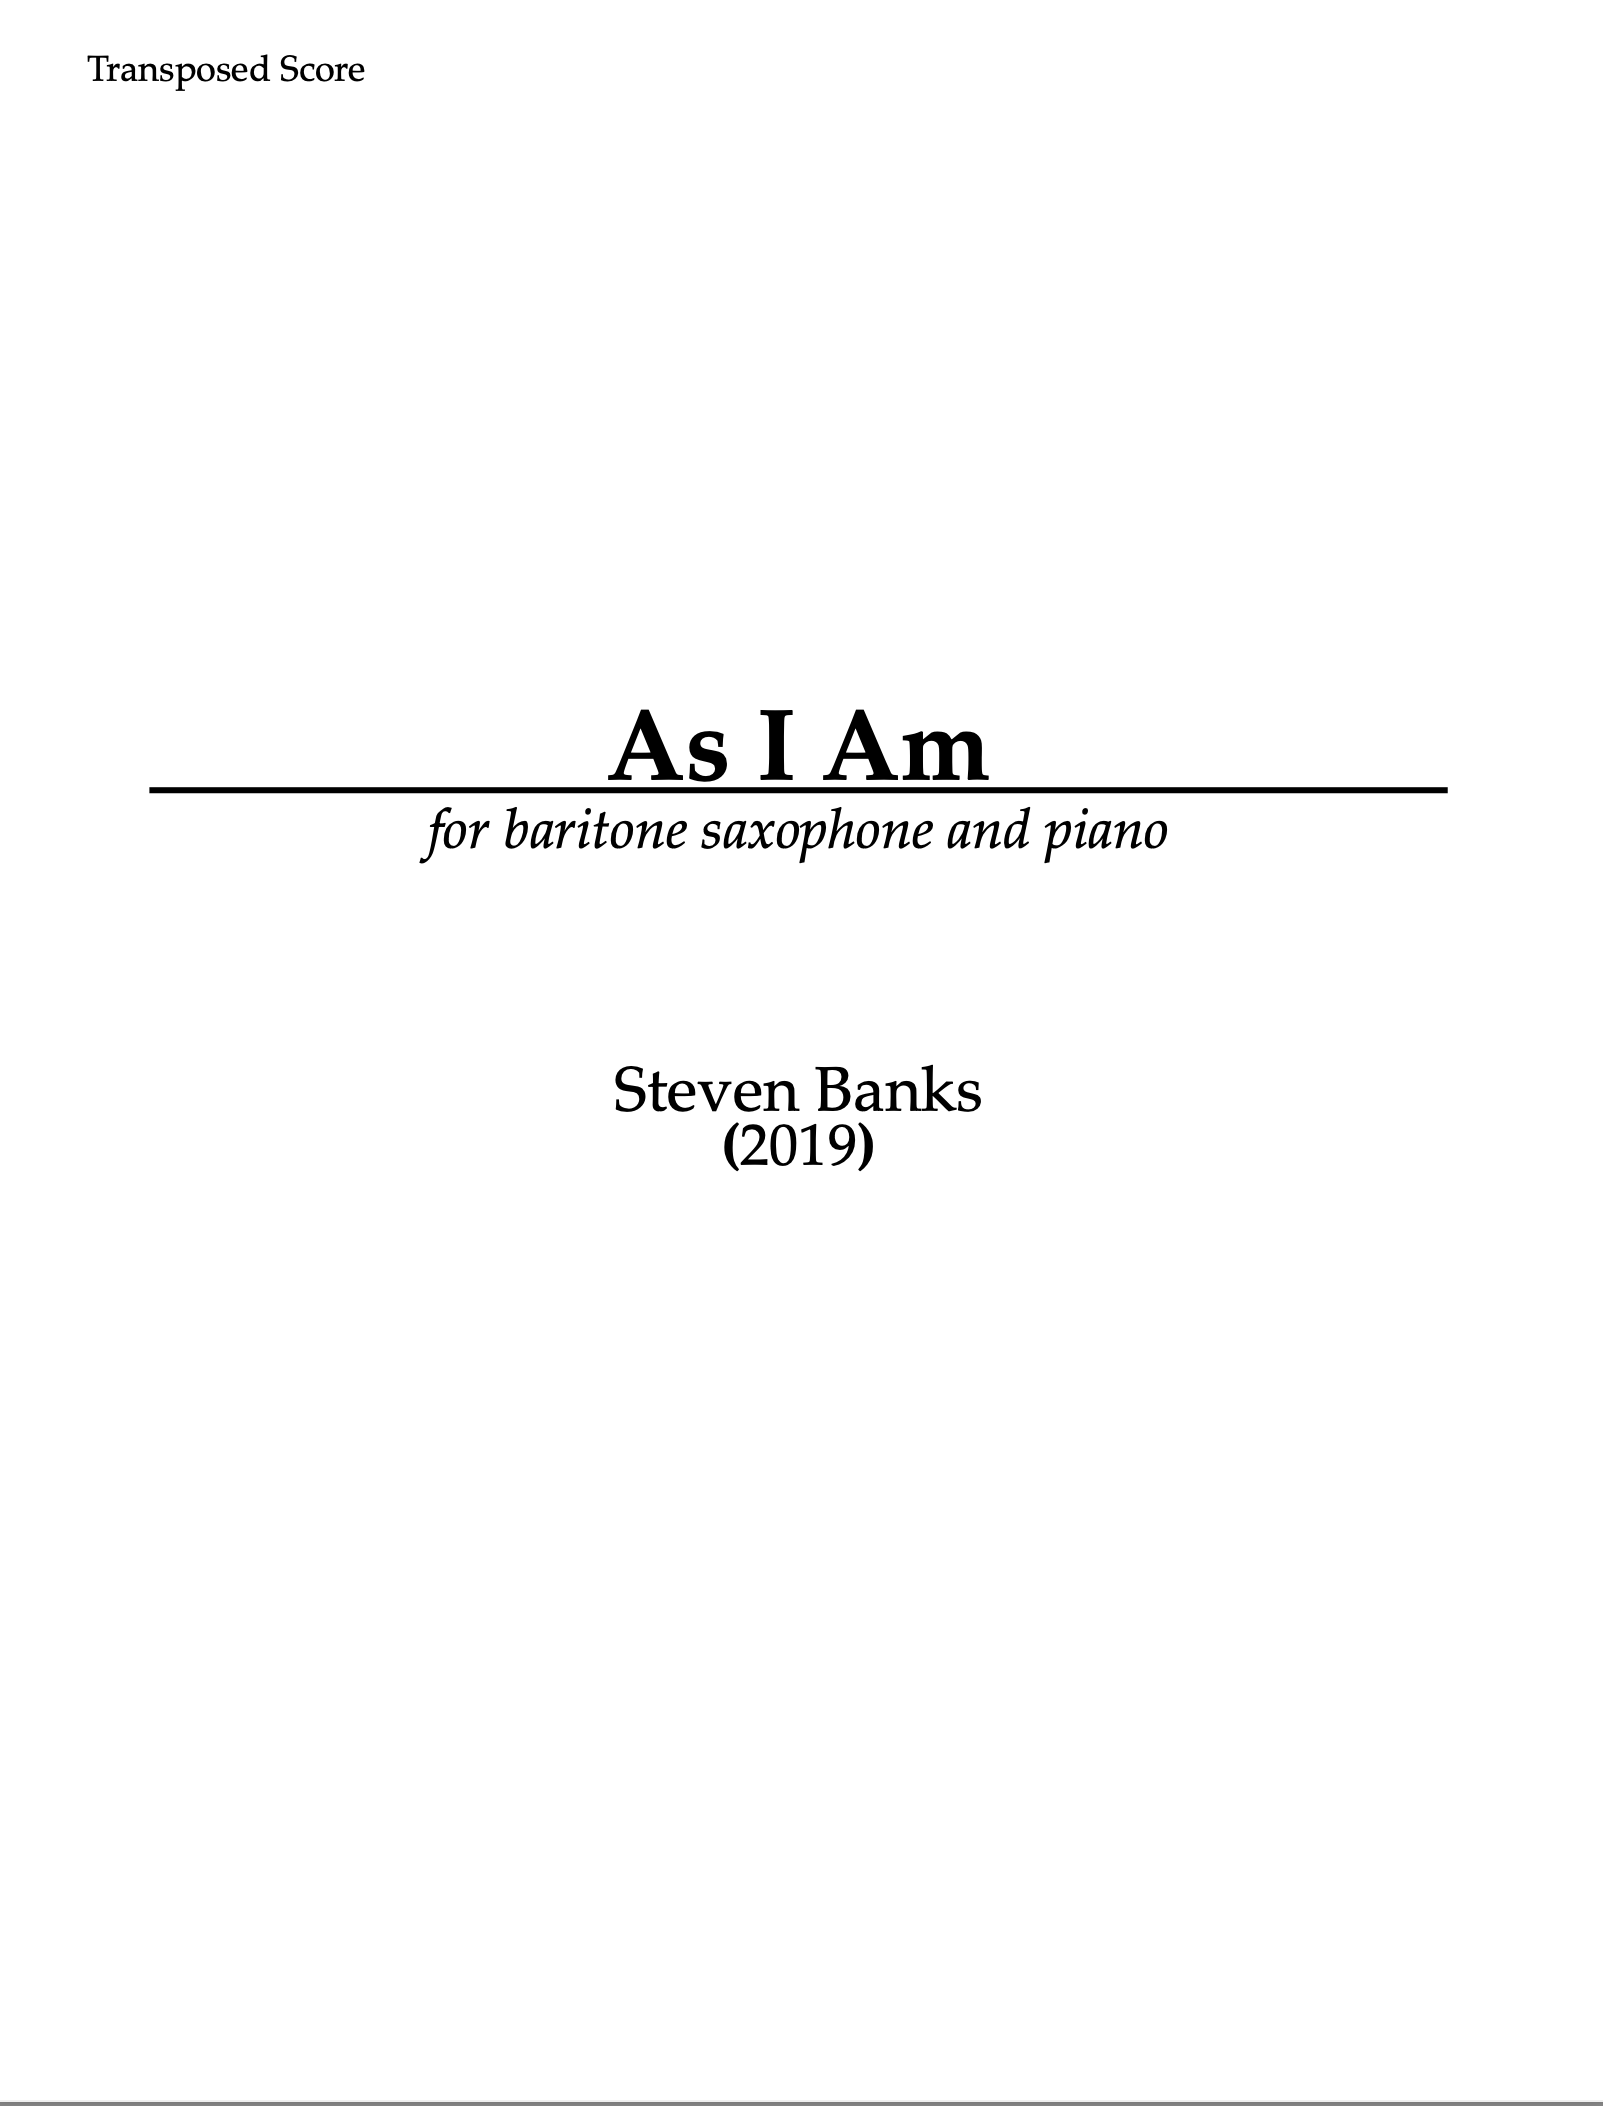 As I Am by Steven Banks